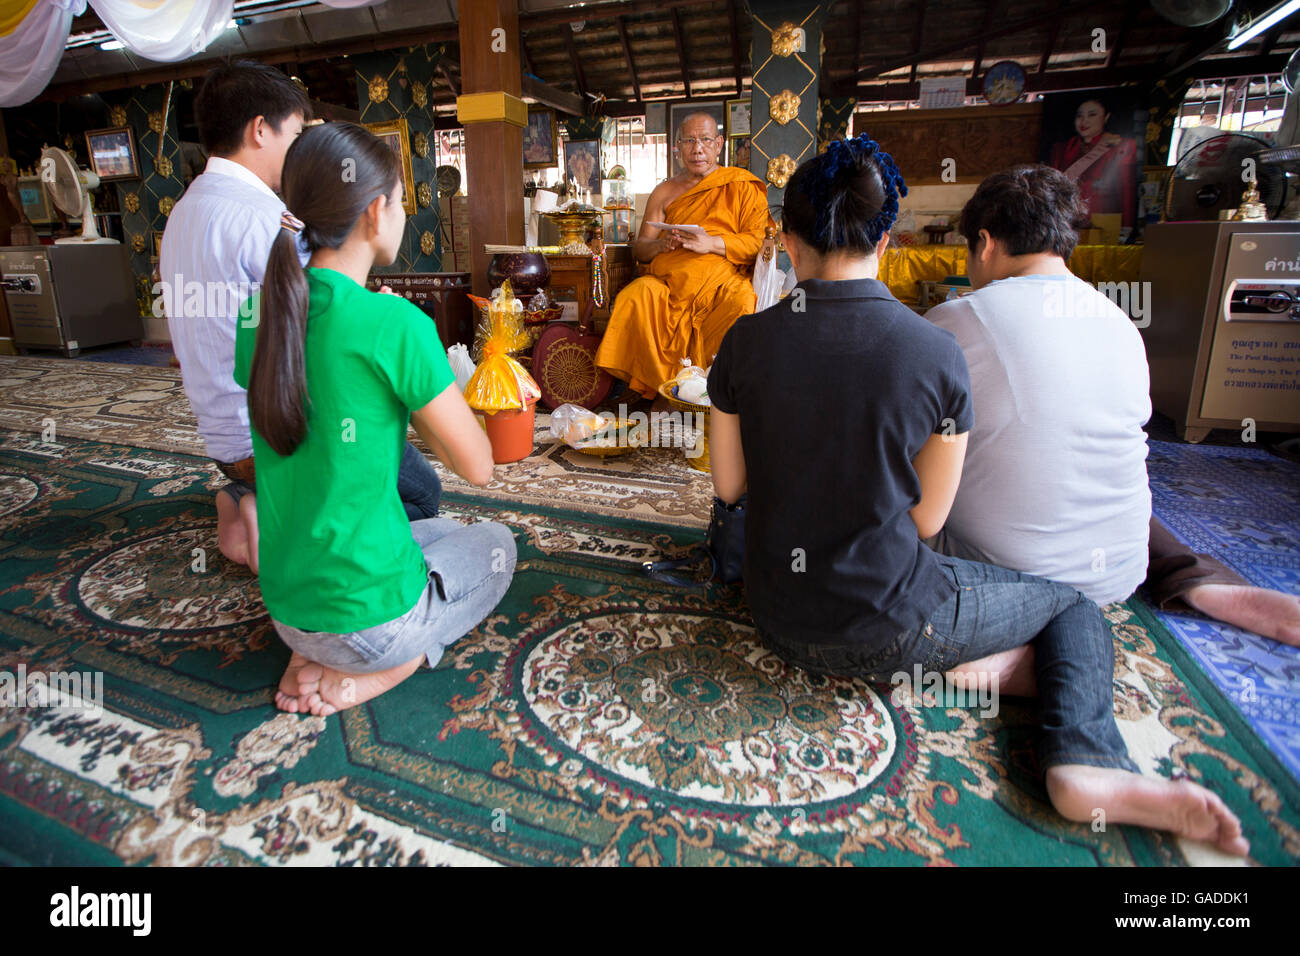 Asia, Thailand, Chiang Mai, Wat Doi Kham (Golden Temple), monk blessing temple goers, temple goers making merit / paying respect, Thai family life Stock Photo